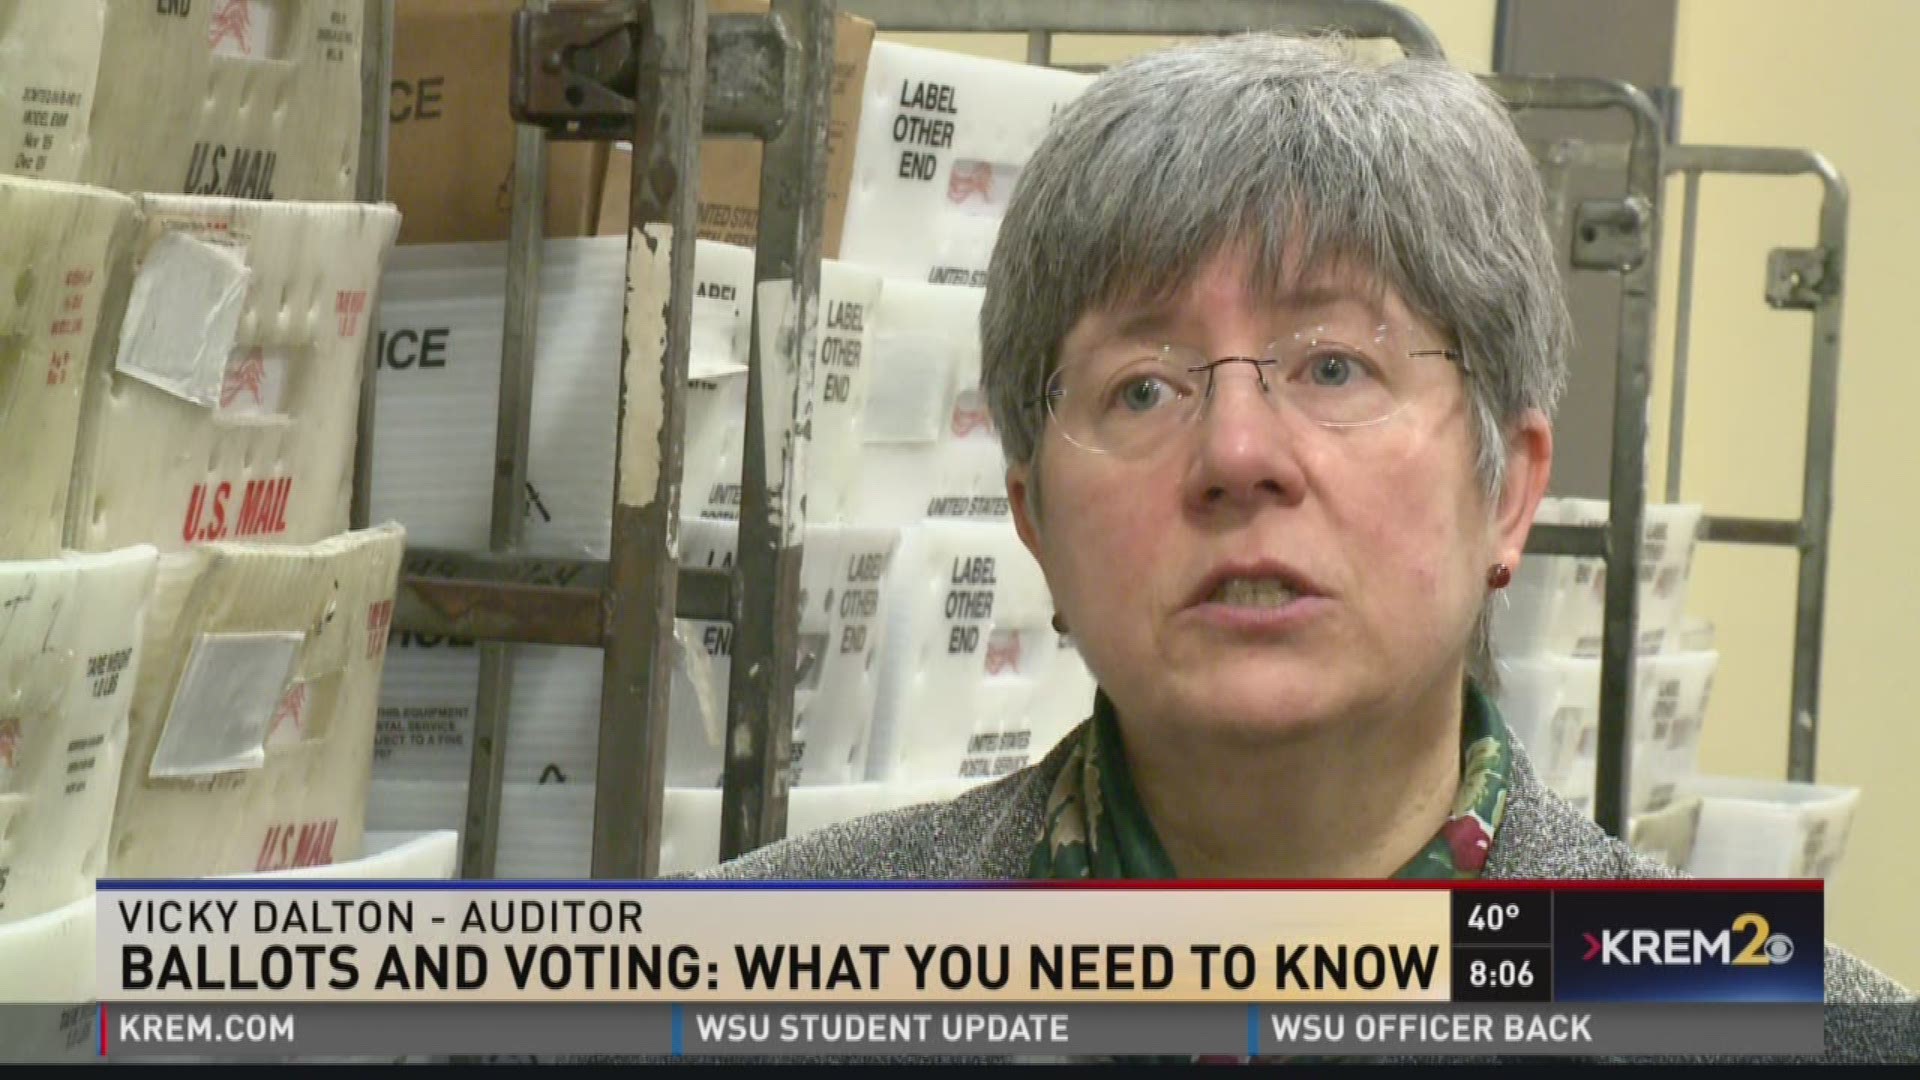 Ballots and voting: What you need to know